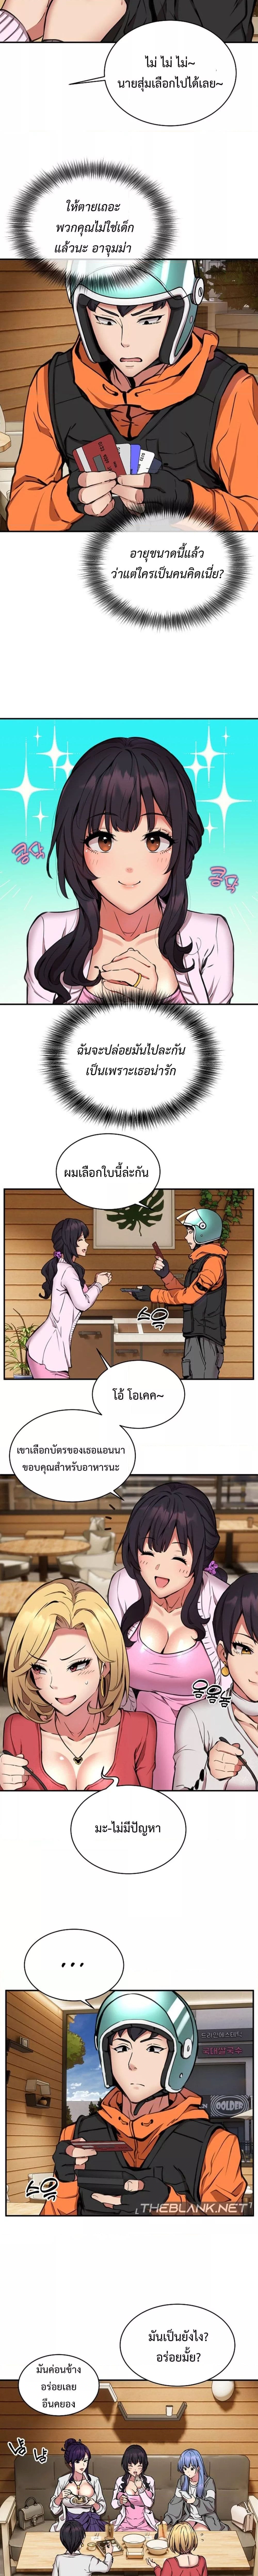 Driver in the New City ตอนที่ 7 ภาพ 10